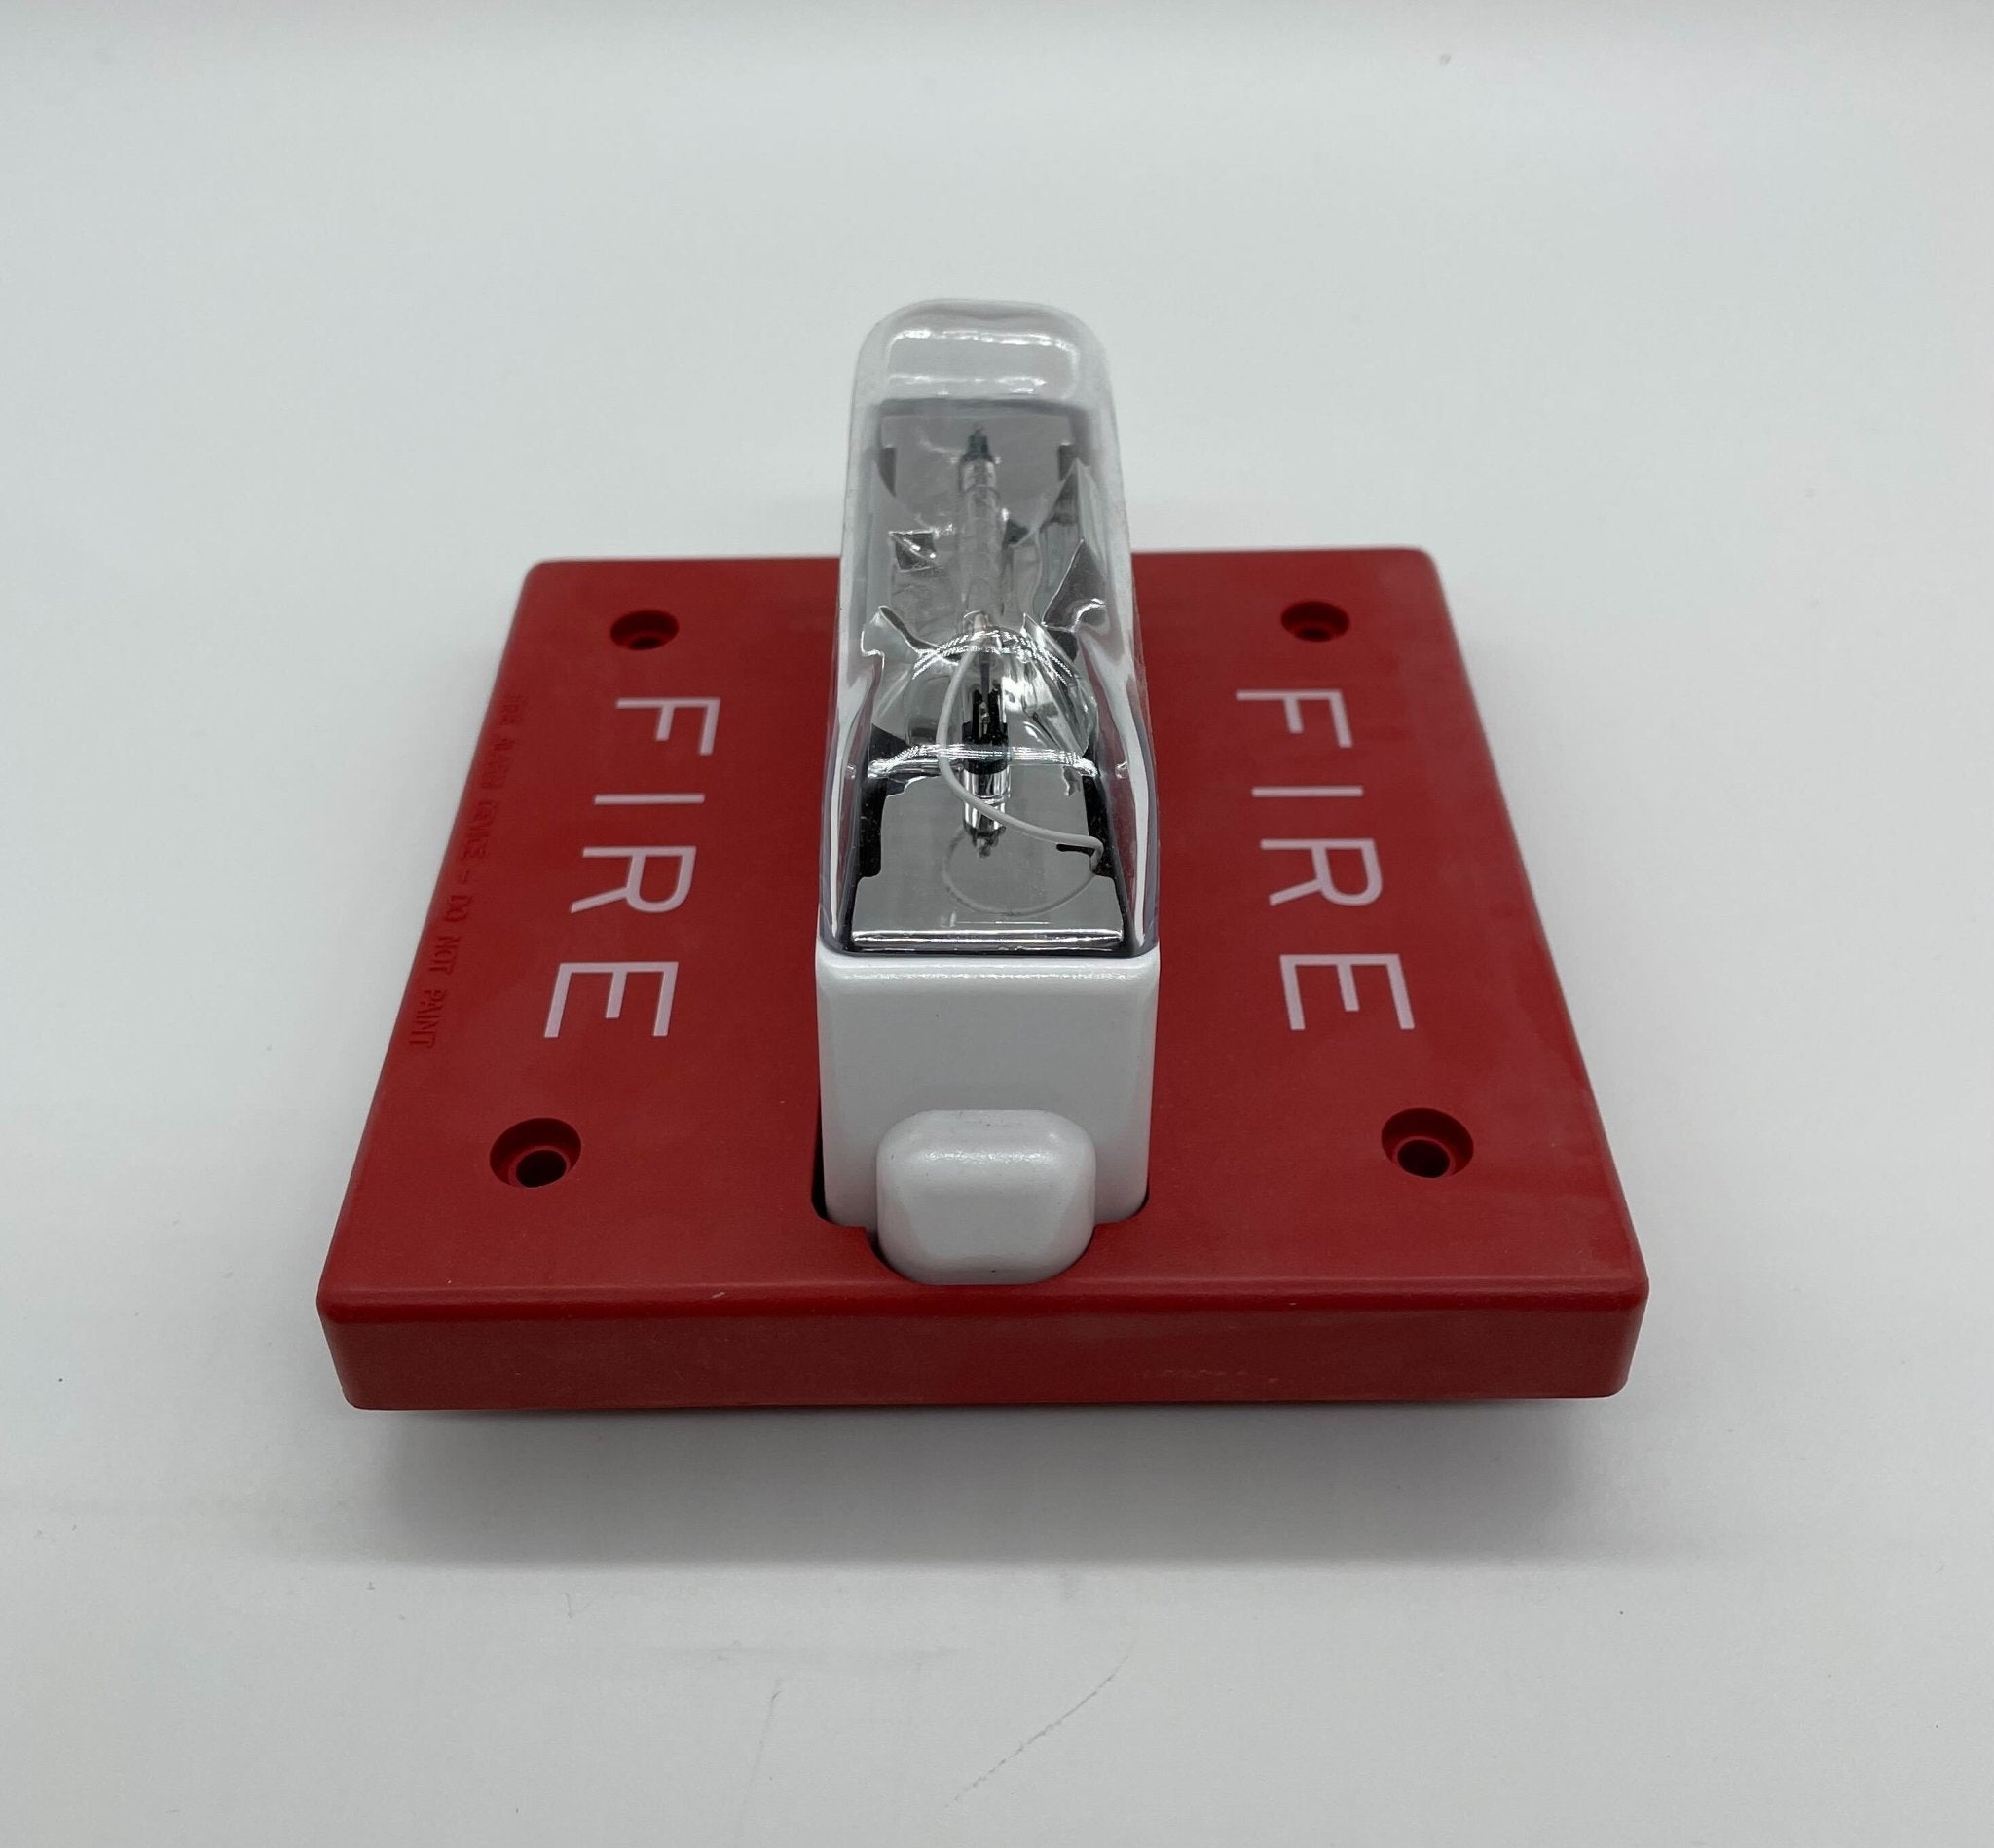 Wheelock RSSWP-24MCWH-FR - The Fire Alarm Supplier